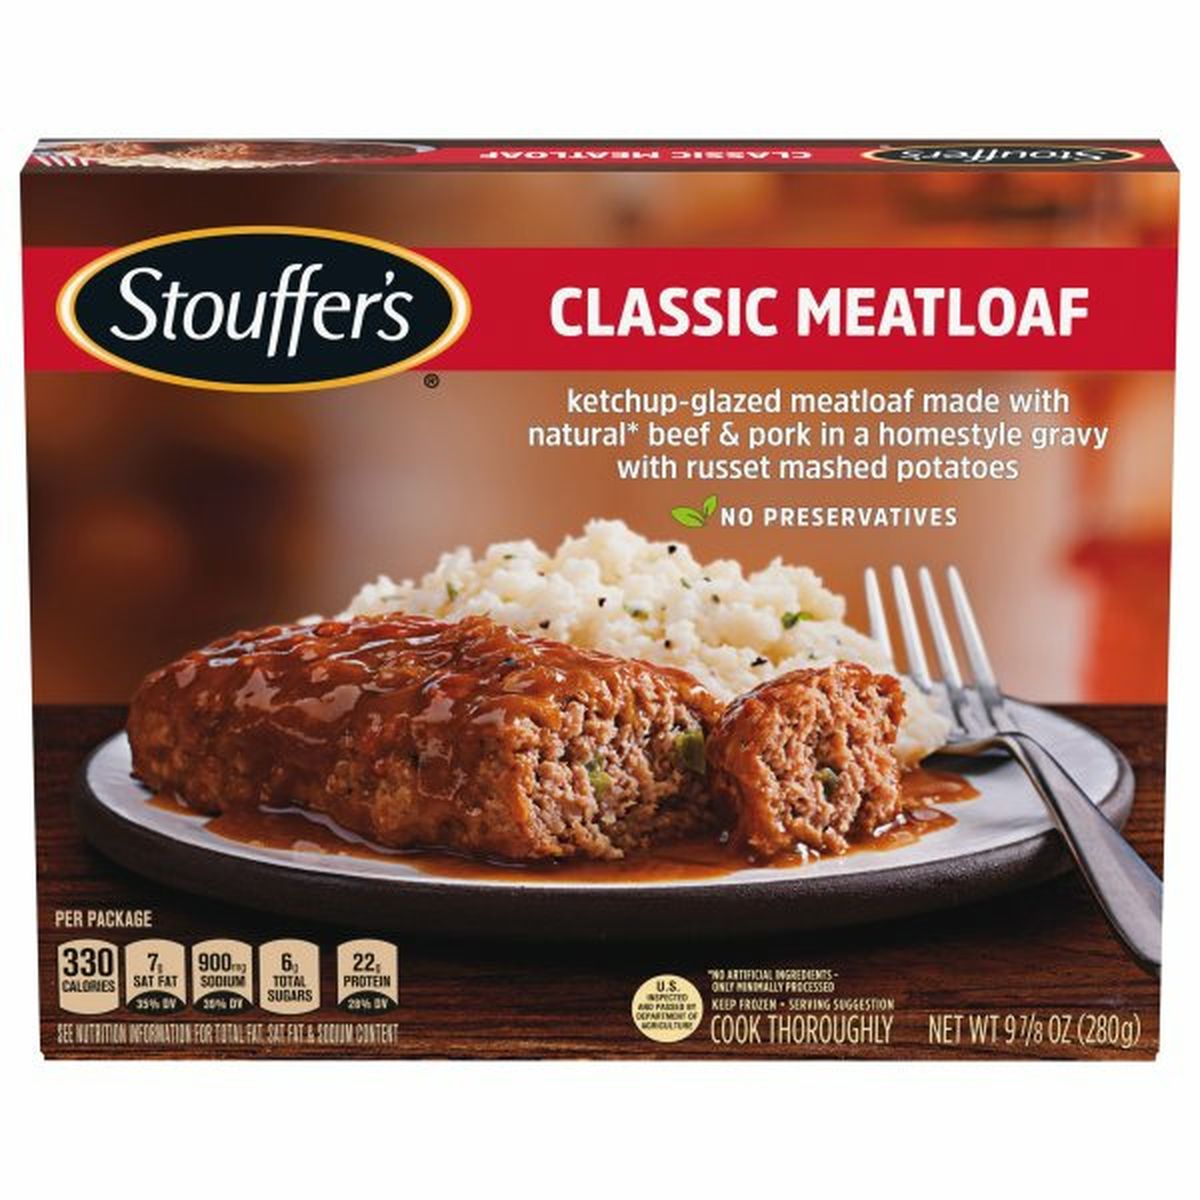 Calories in Stouffer's Meatloaf, Classic